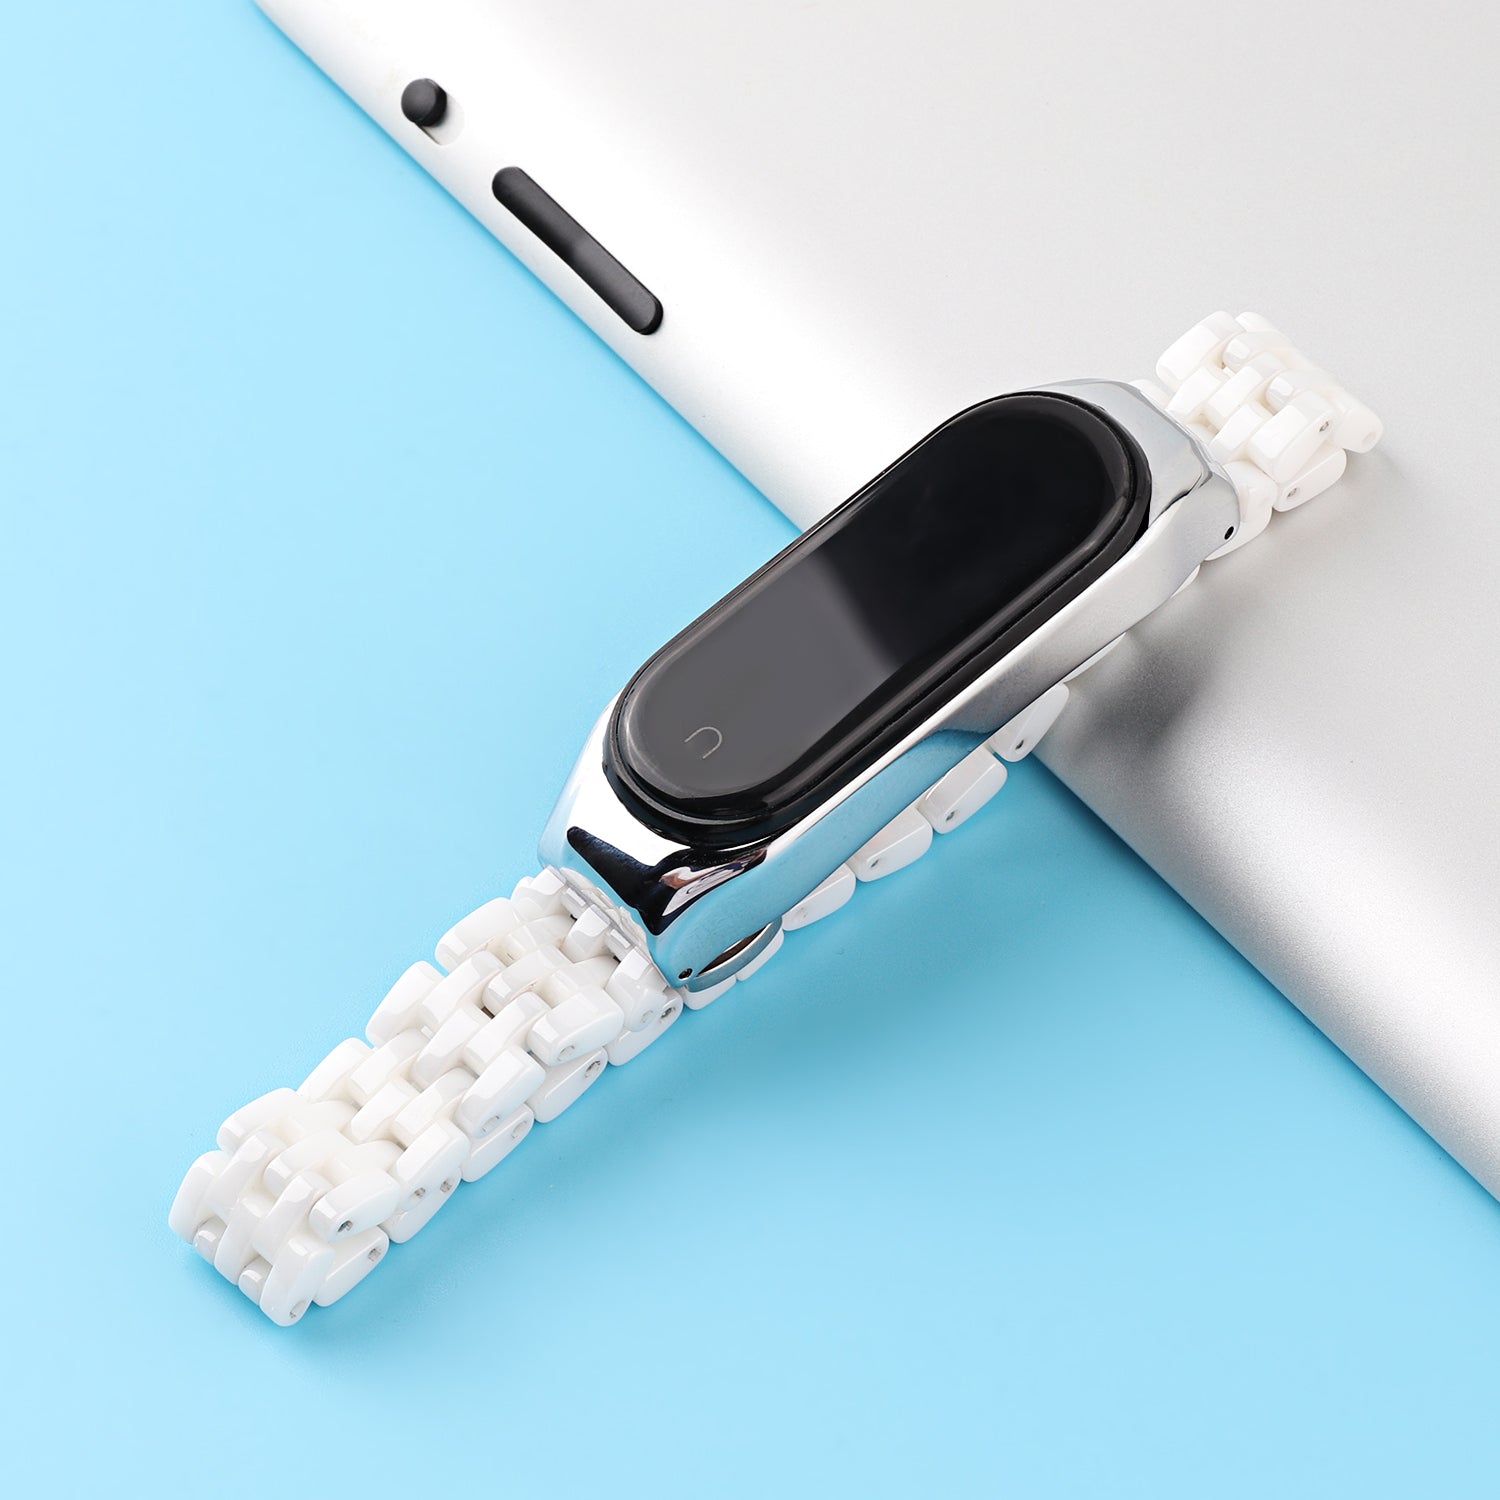 For Xiaomi Mi Band 5/Mi Band 6 Ceramics+Stainless Steel Watch Strap Replacement Watch Band - Five Beads White